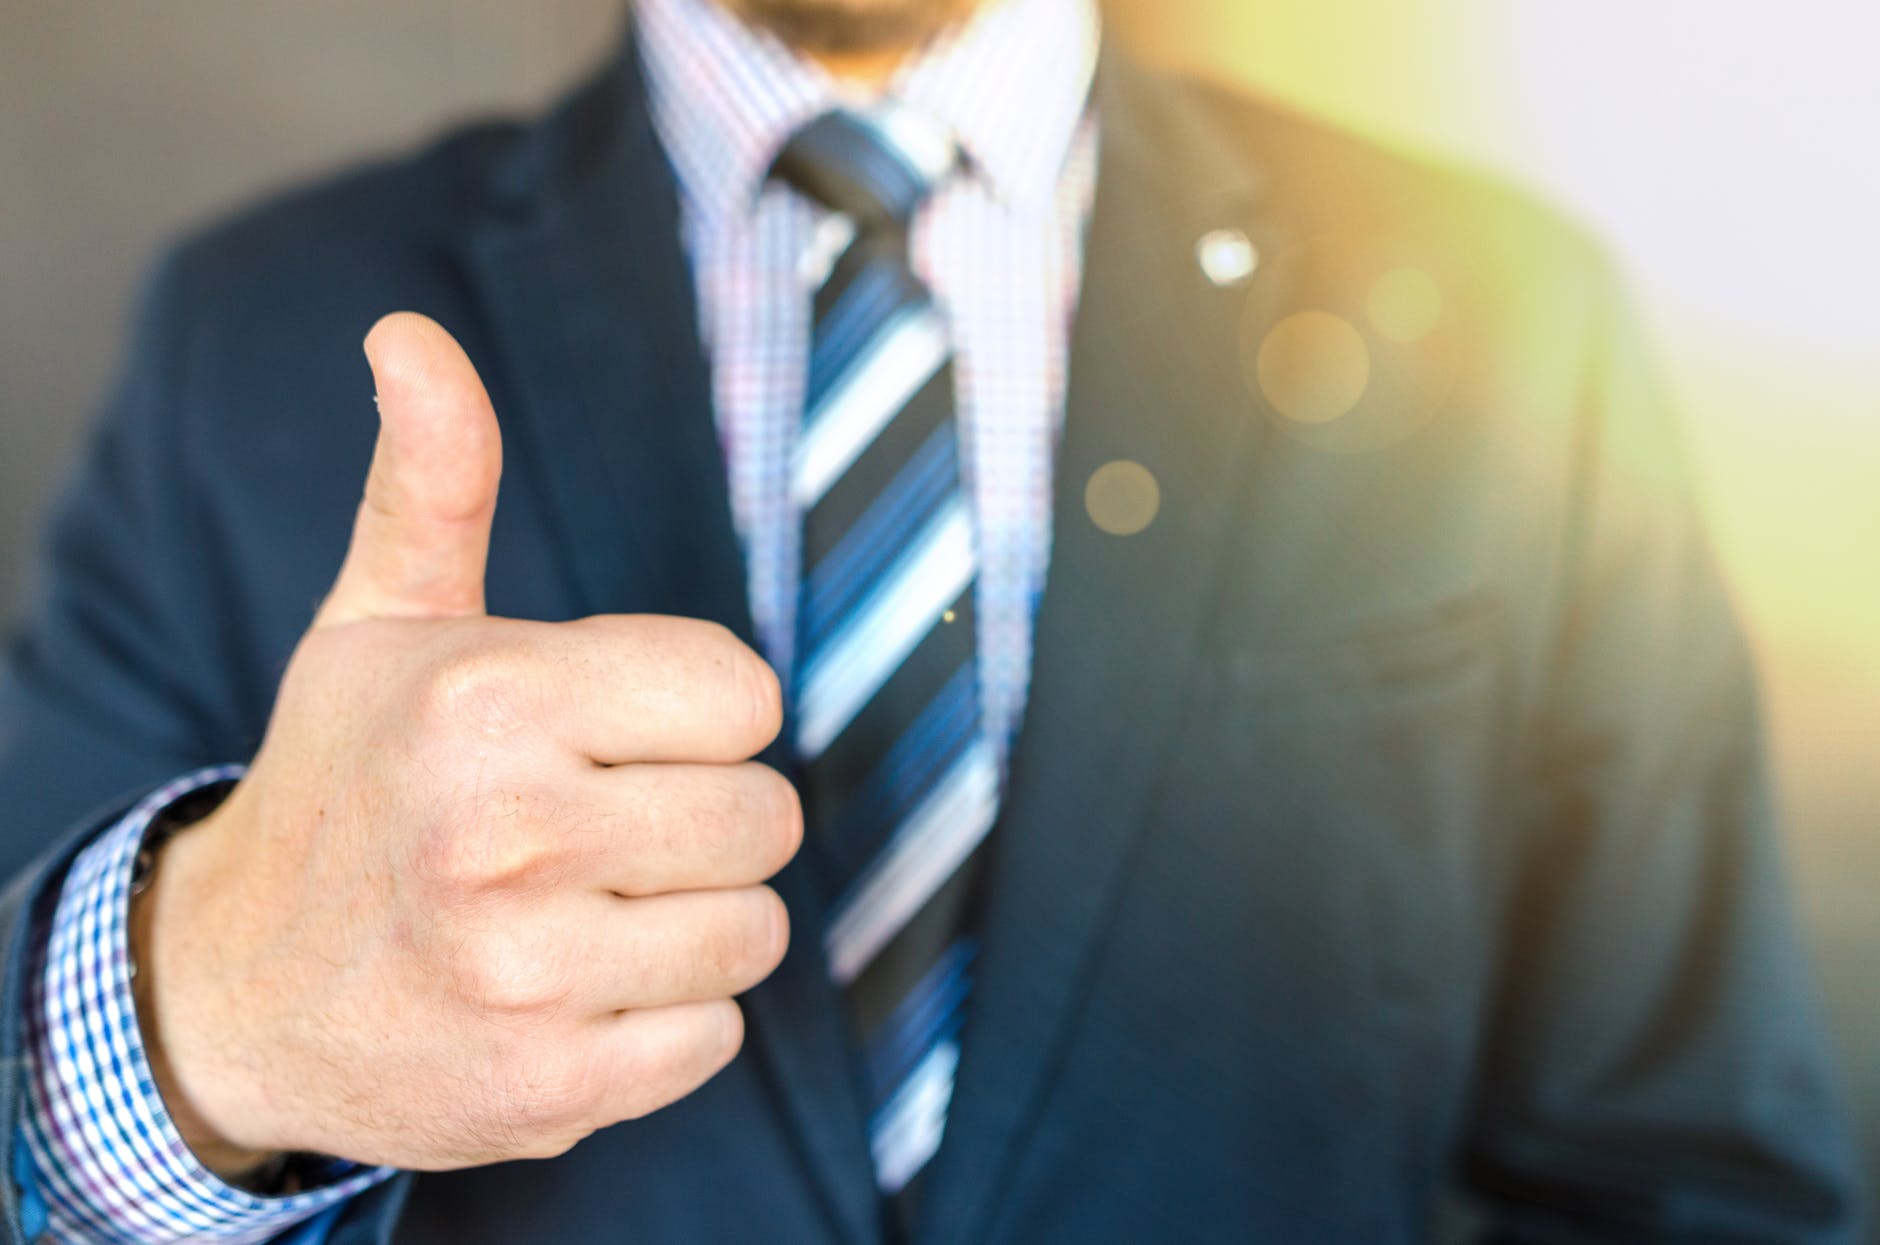 close up photo of man wearing black suit jacket doing thumbs up gesture